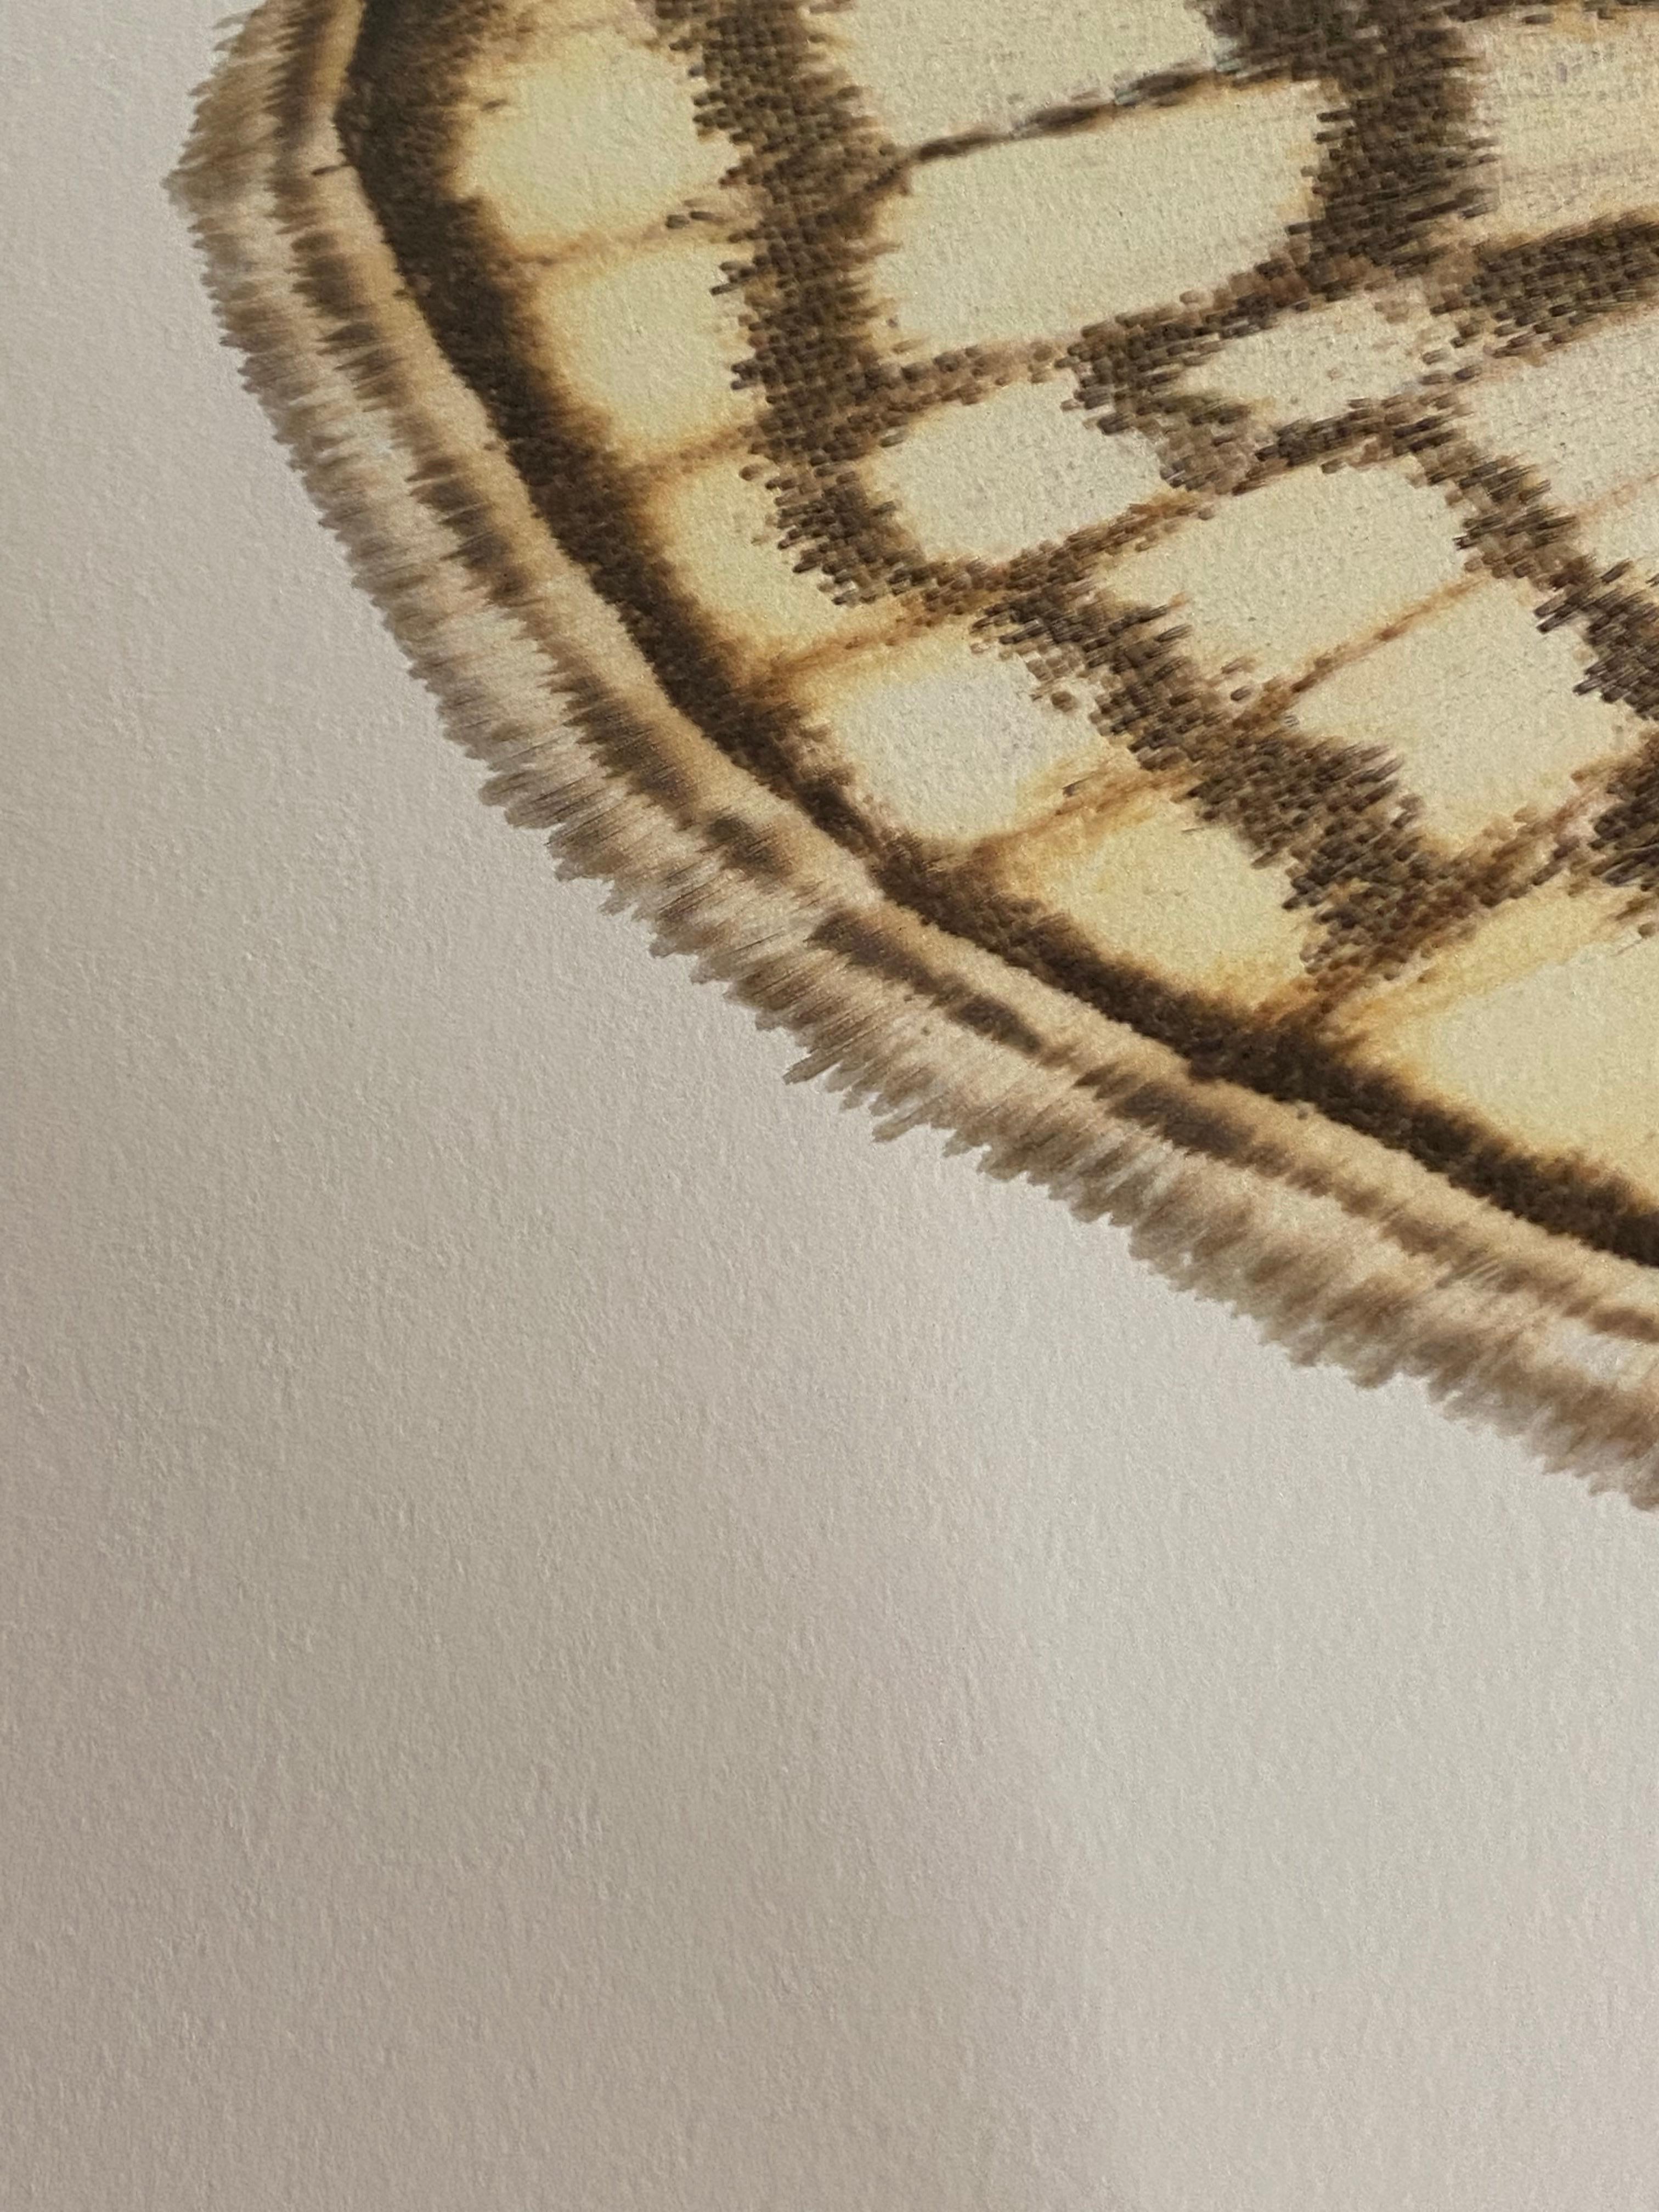 In this hyper-detailed archival pigment print on watercolor paper, a moth with light brown and bright yellow markings is dramatic against a solid white background. 

Price shown is the unframed price. Please inquire with the gallery for framing